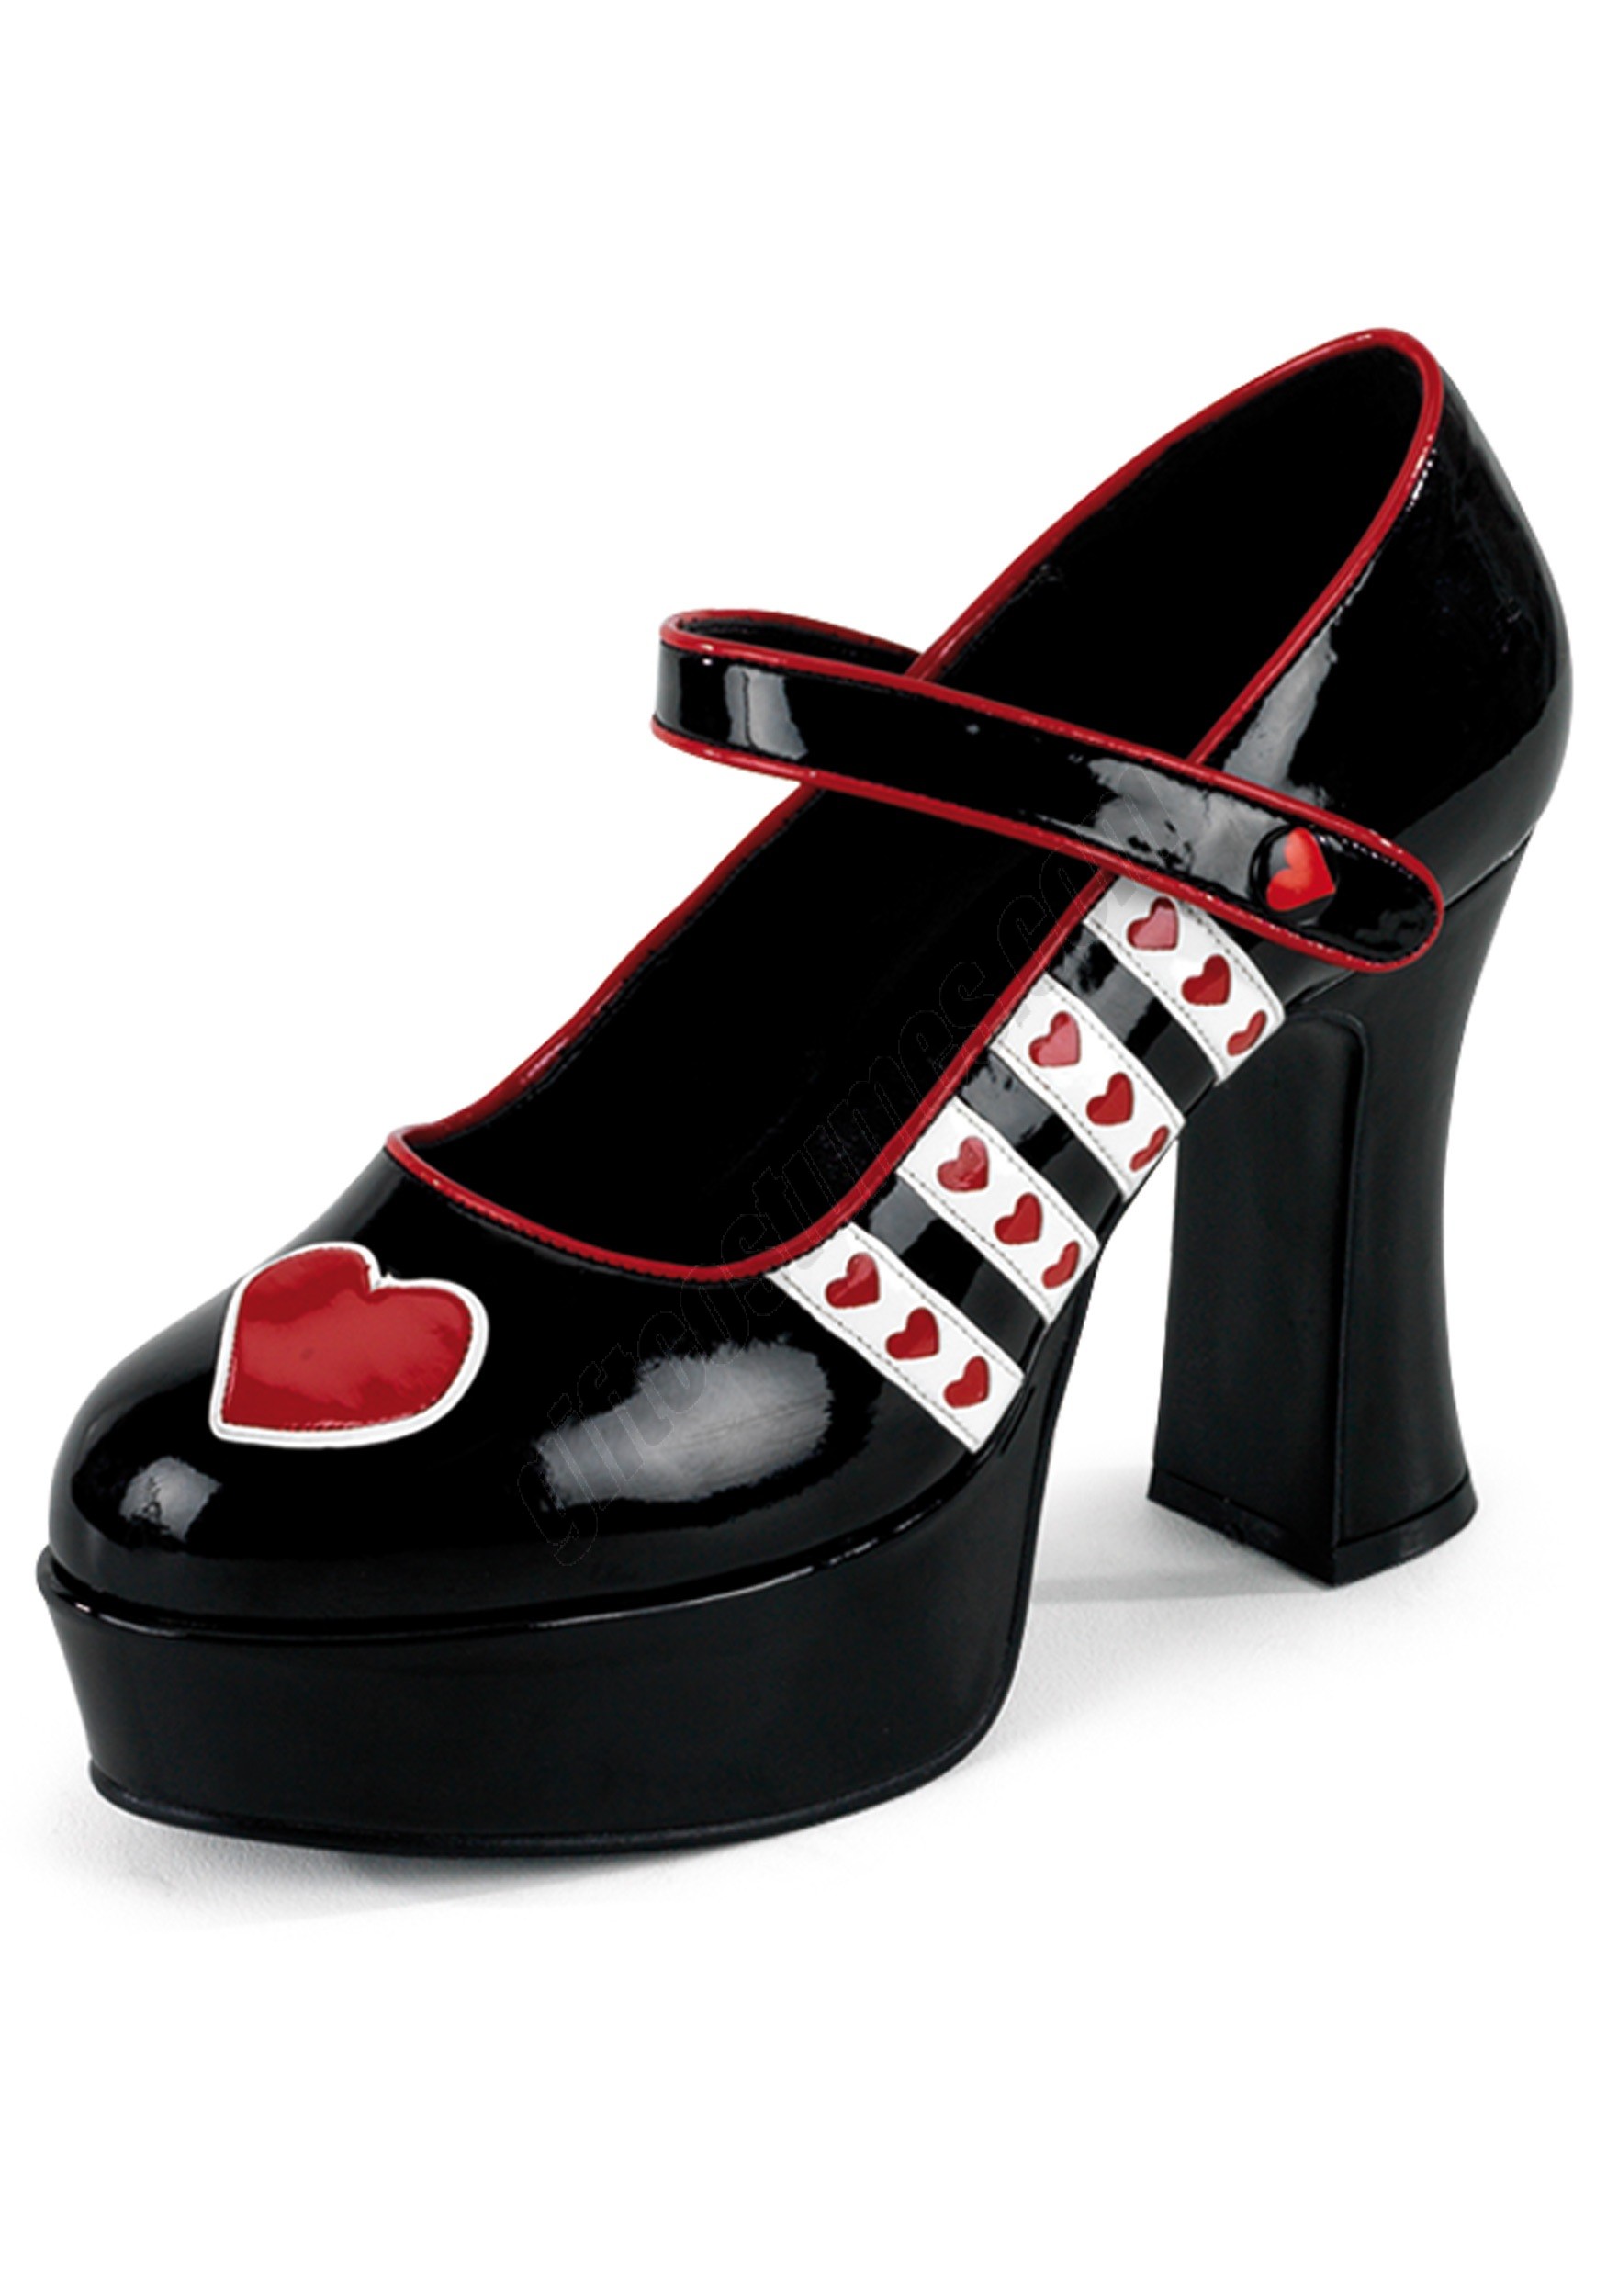 Queen of Hearts Shoes Promotions - Queen of Hearts Shoes Promotions